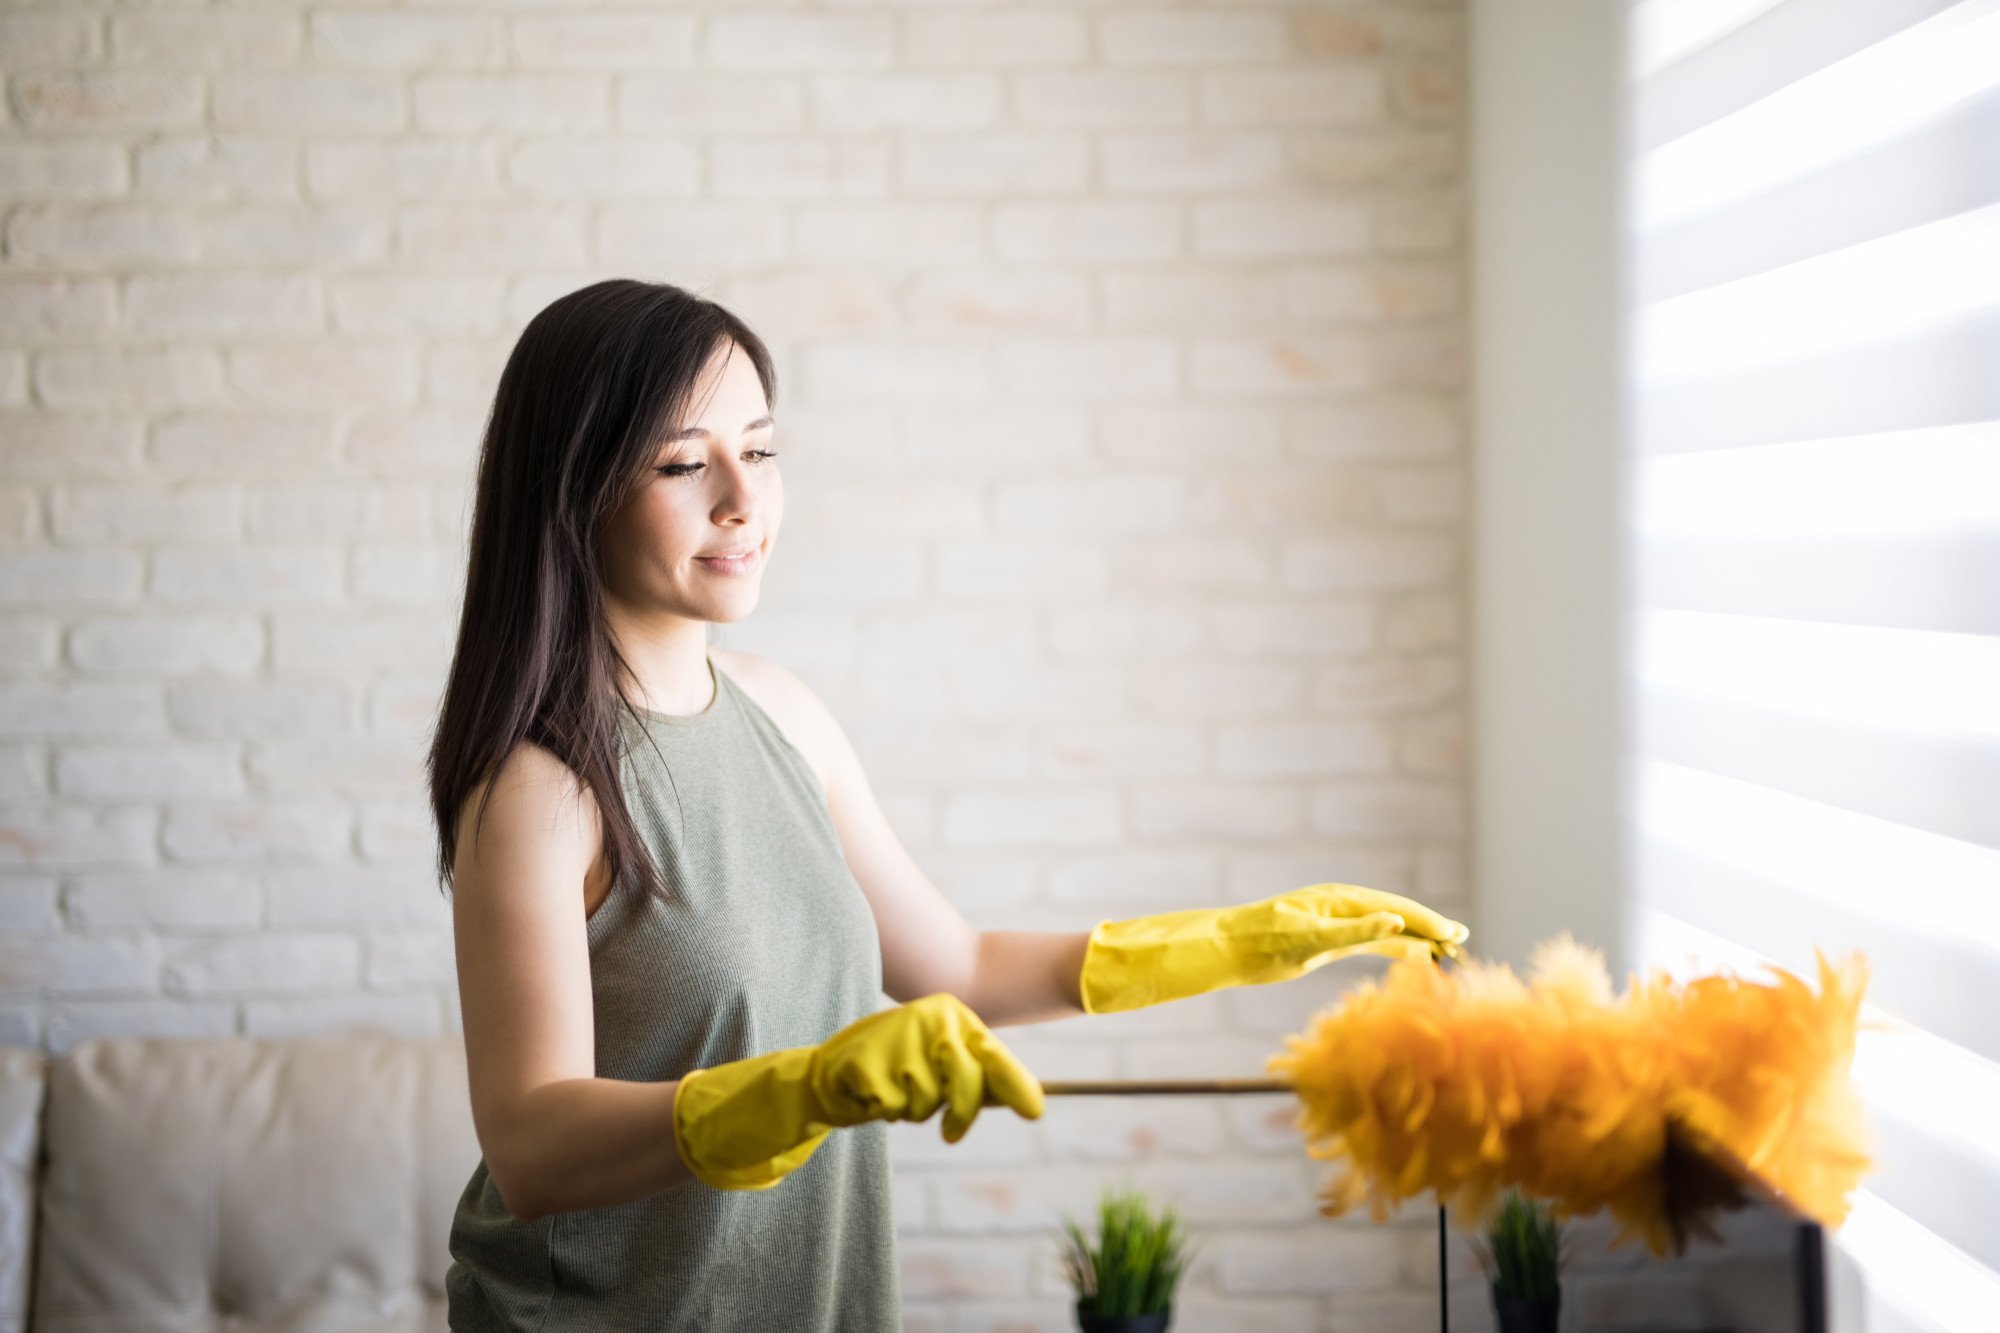 Easy Ways to Keep Your Home Dust Free